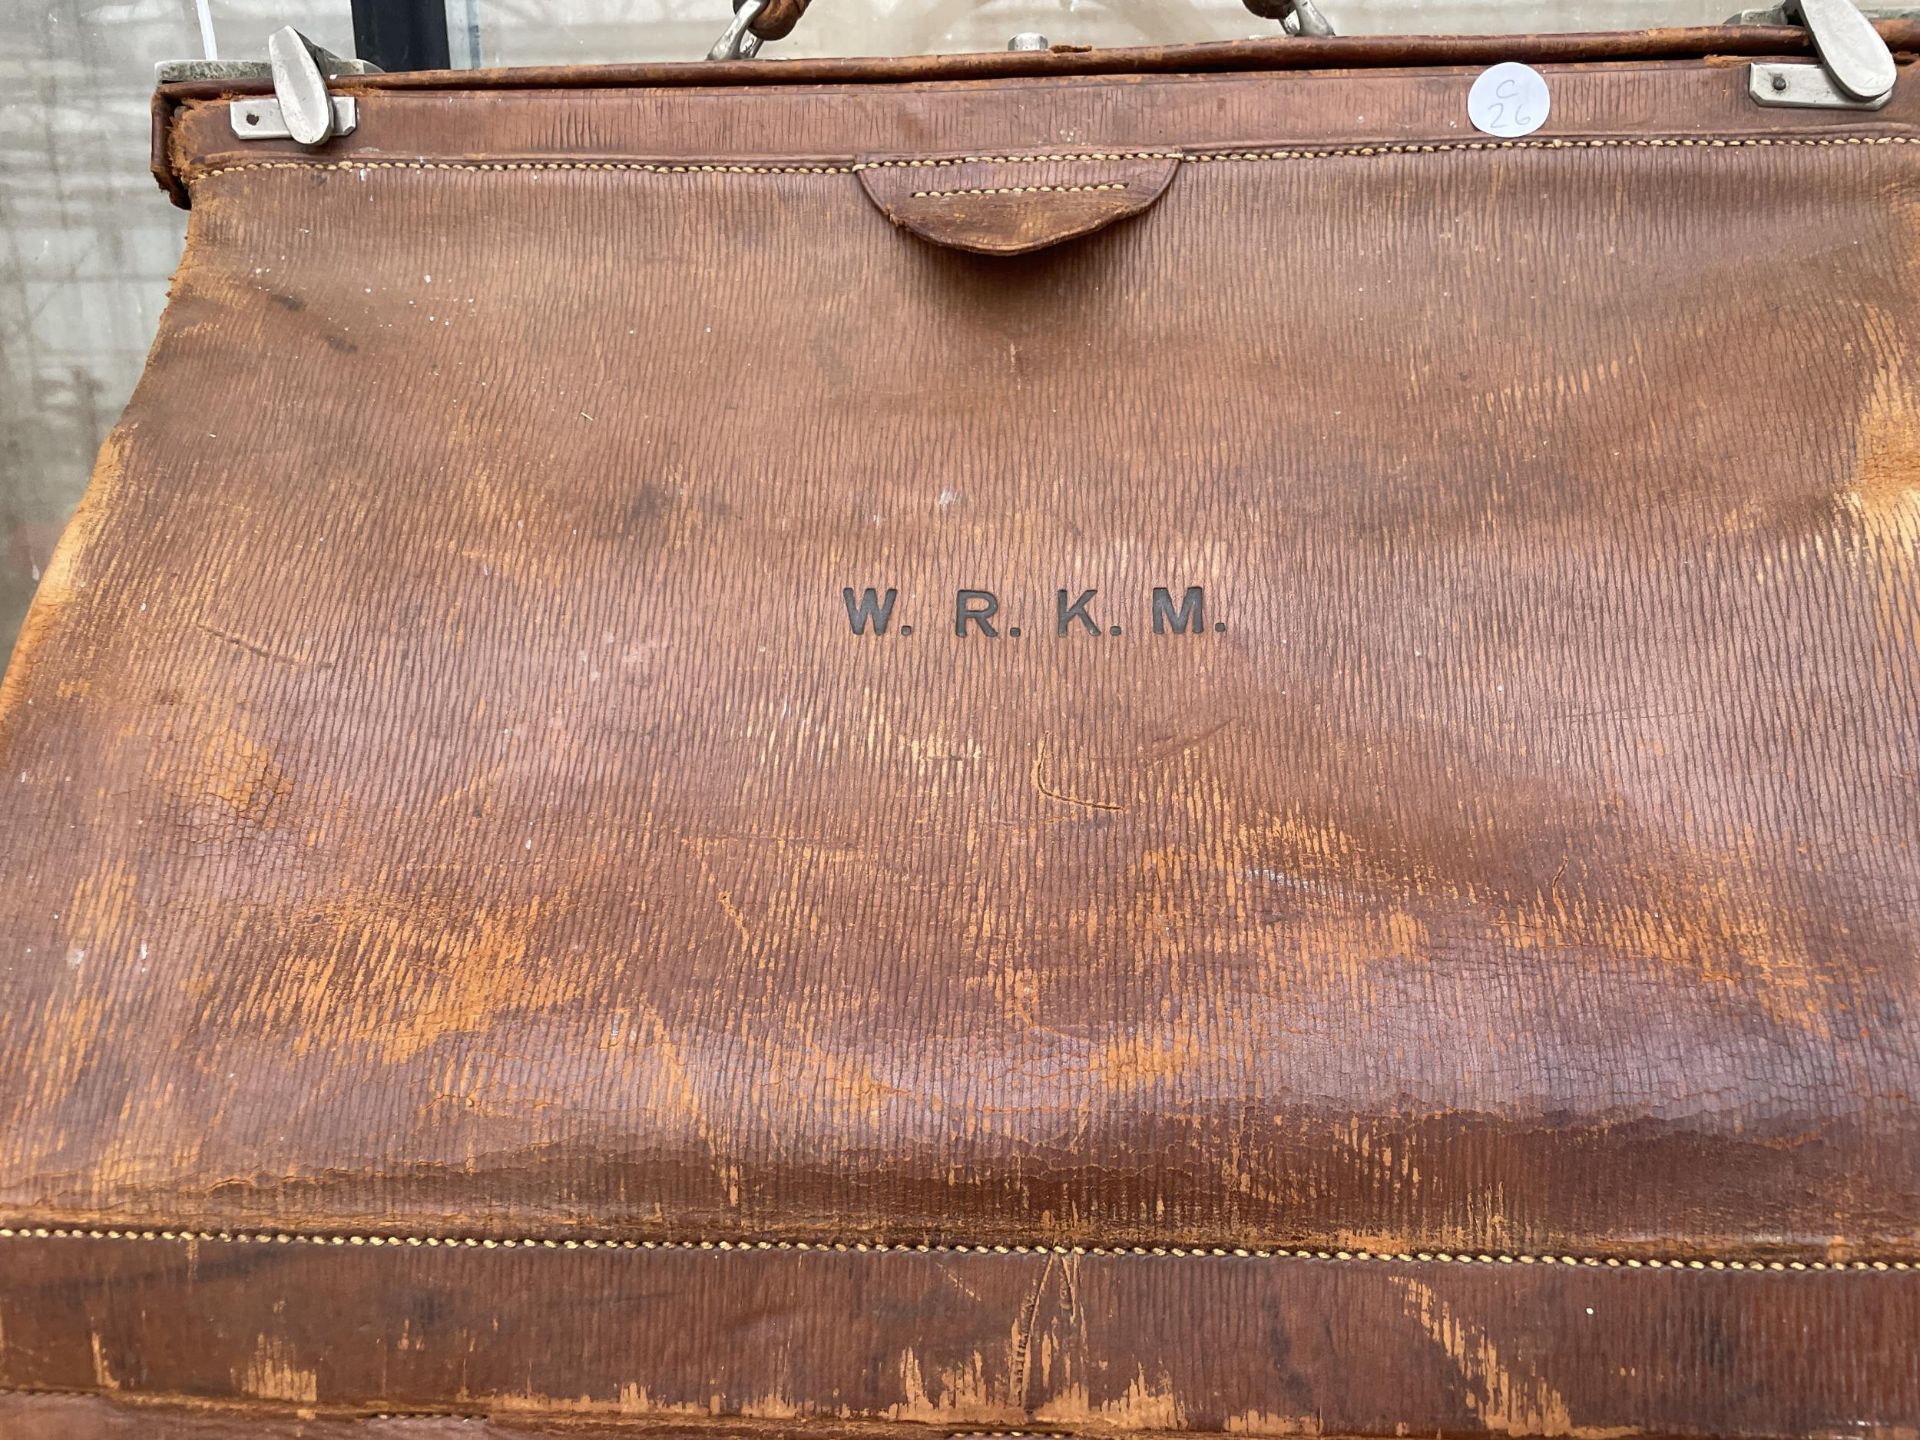 A VINTAGE LEATHER MEDICAL BAG BEARING THE INITIALS W.R.K.M - Image 2 of 3